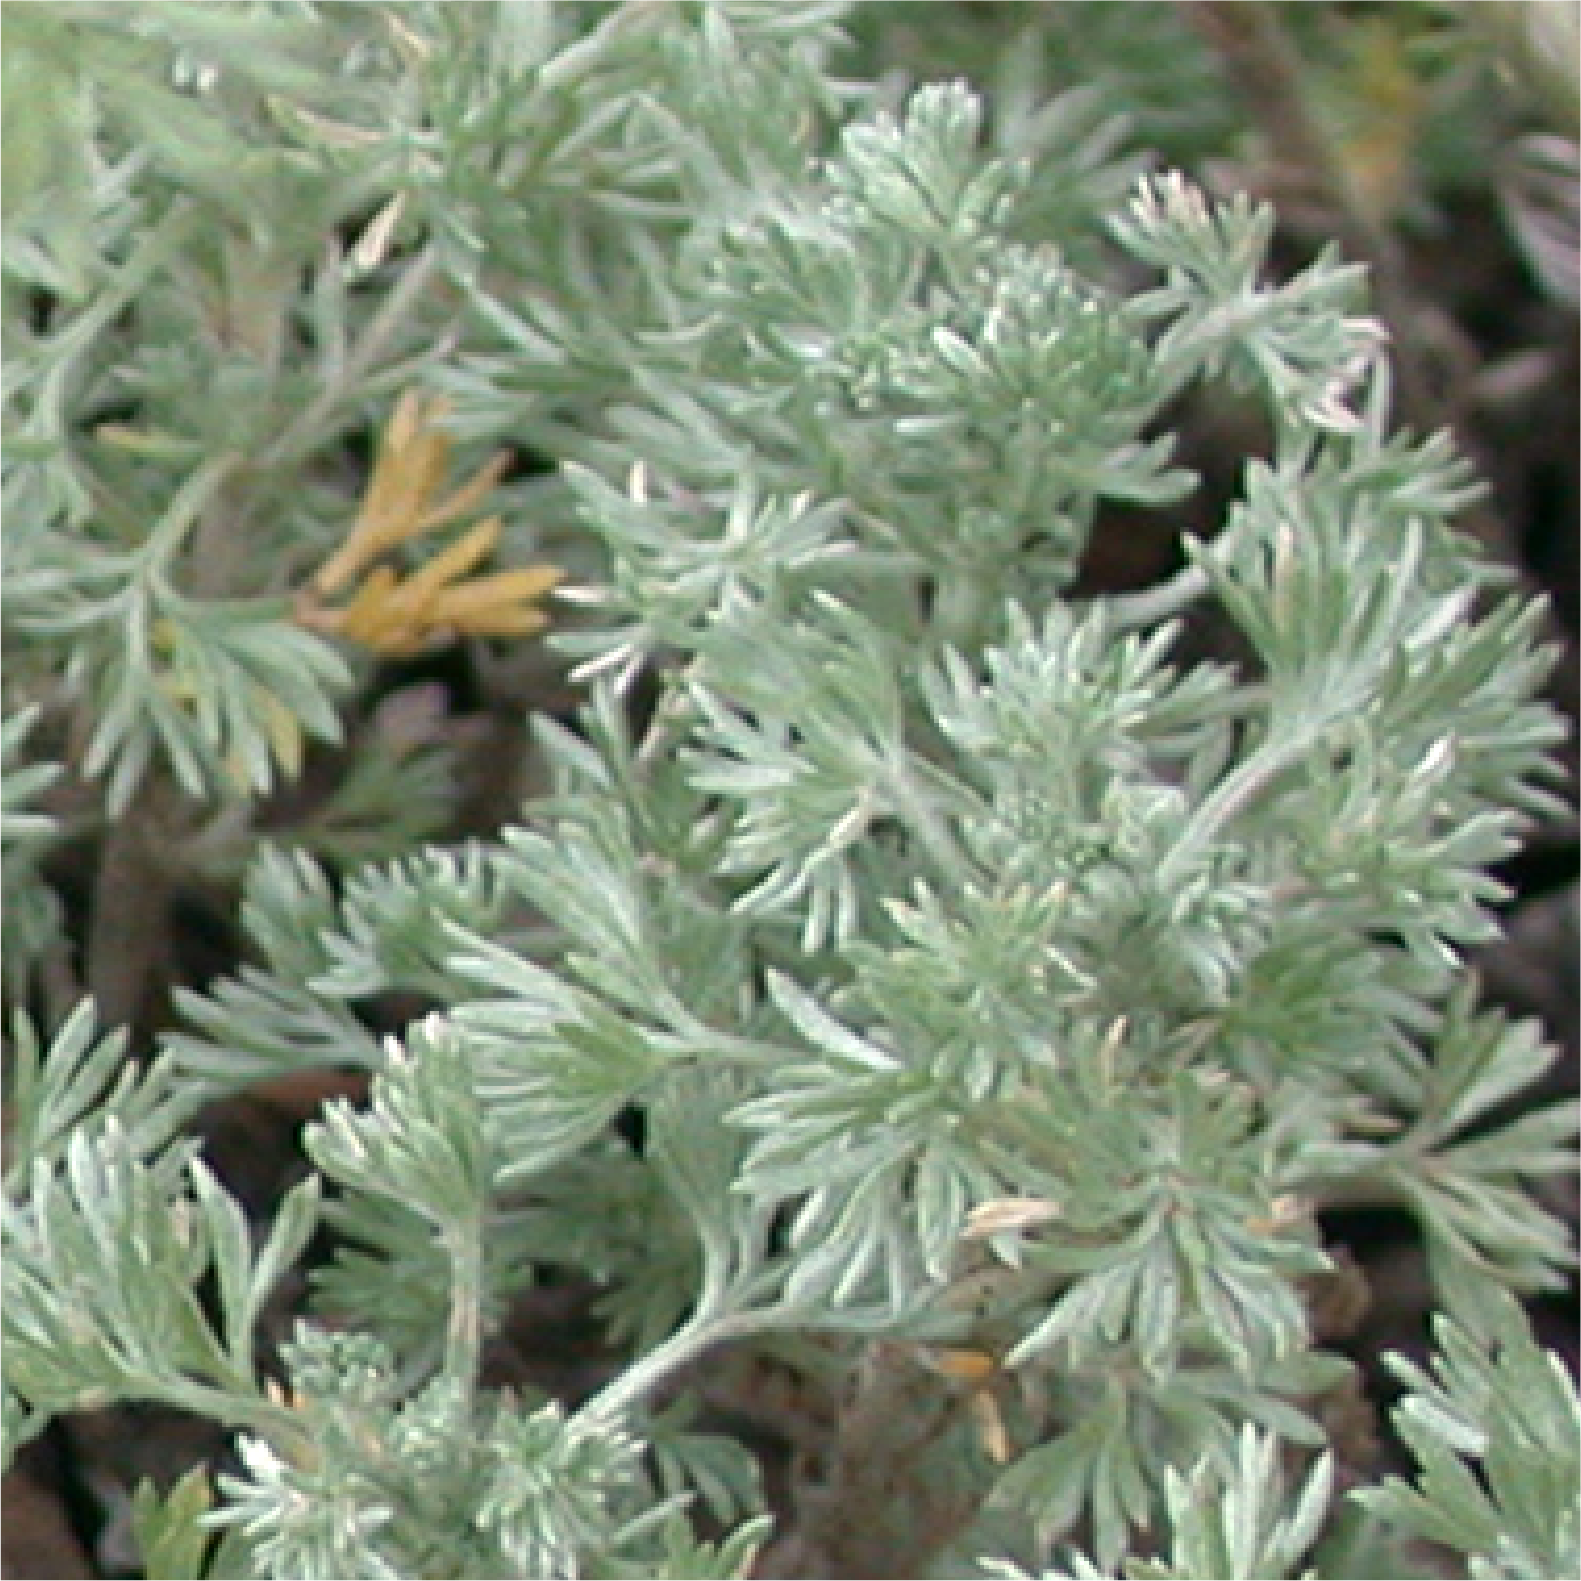 A close up photograph of the pale green leaves of the fringed sage.